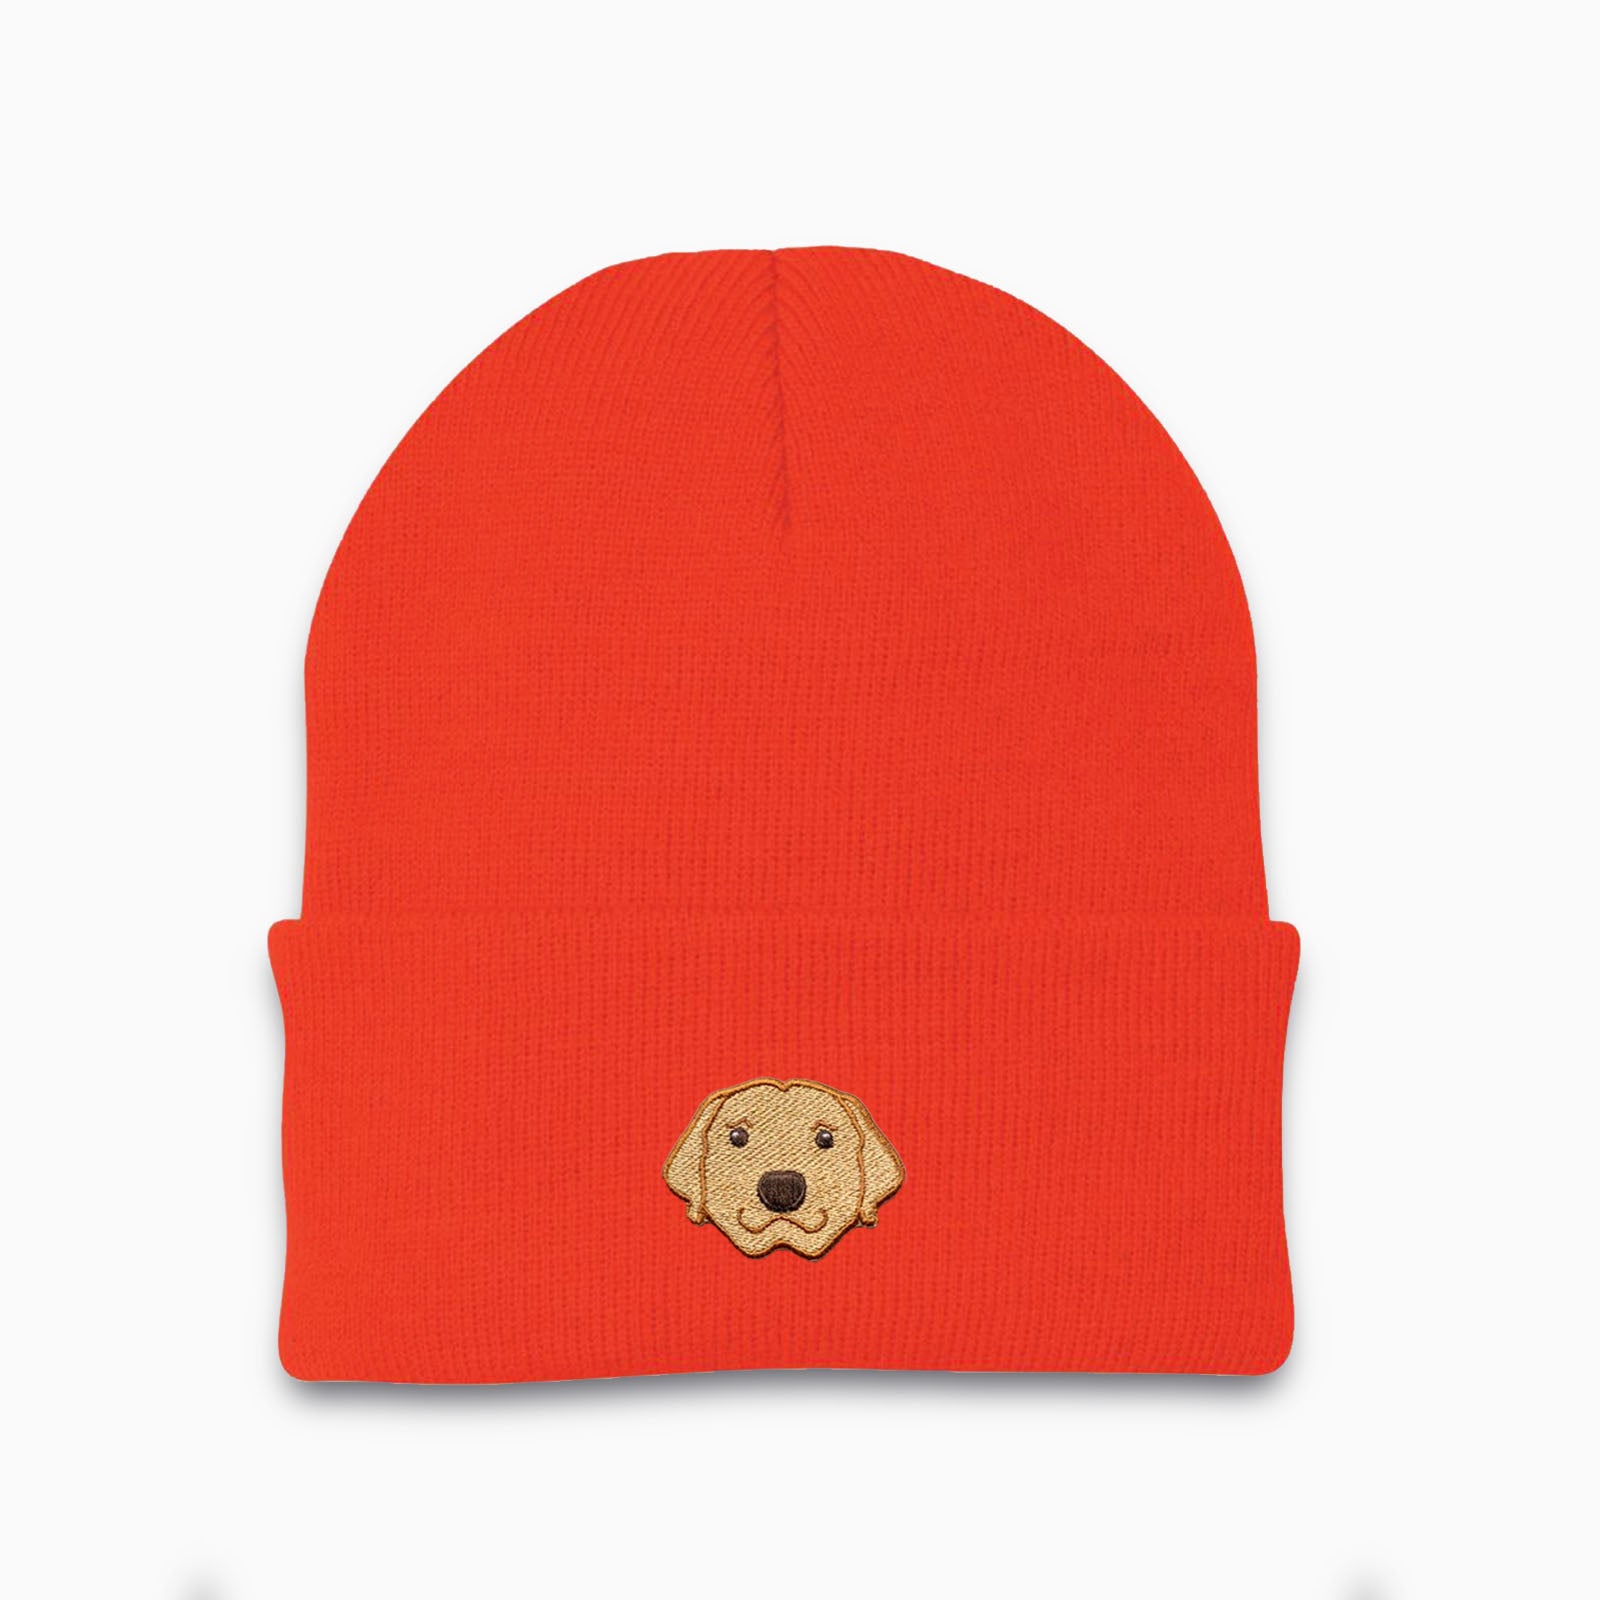 Neon Orange Custom Dog beanie personalized and embroidered on the front.